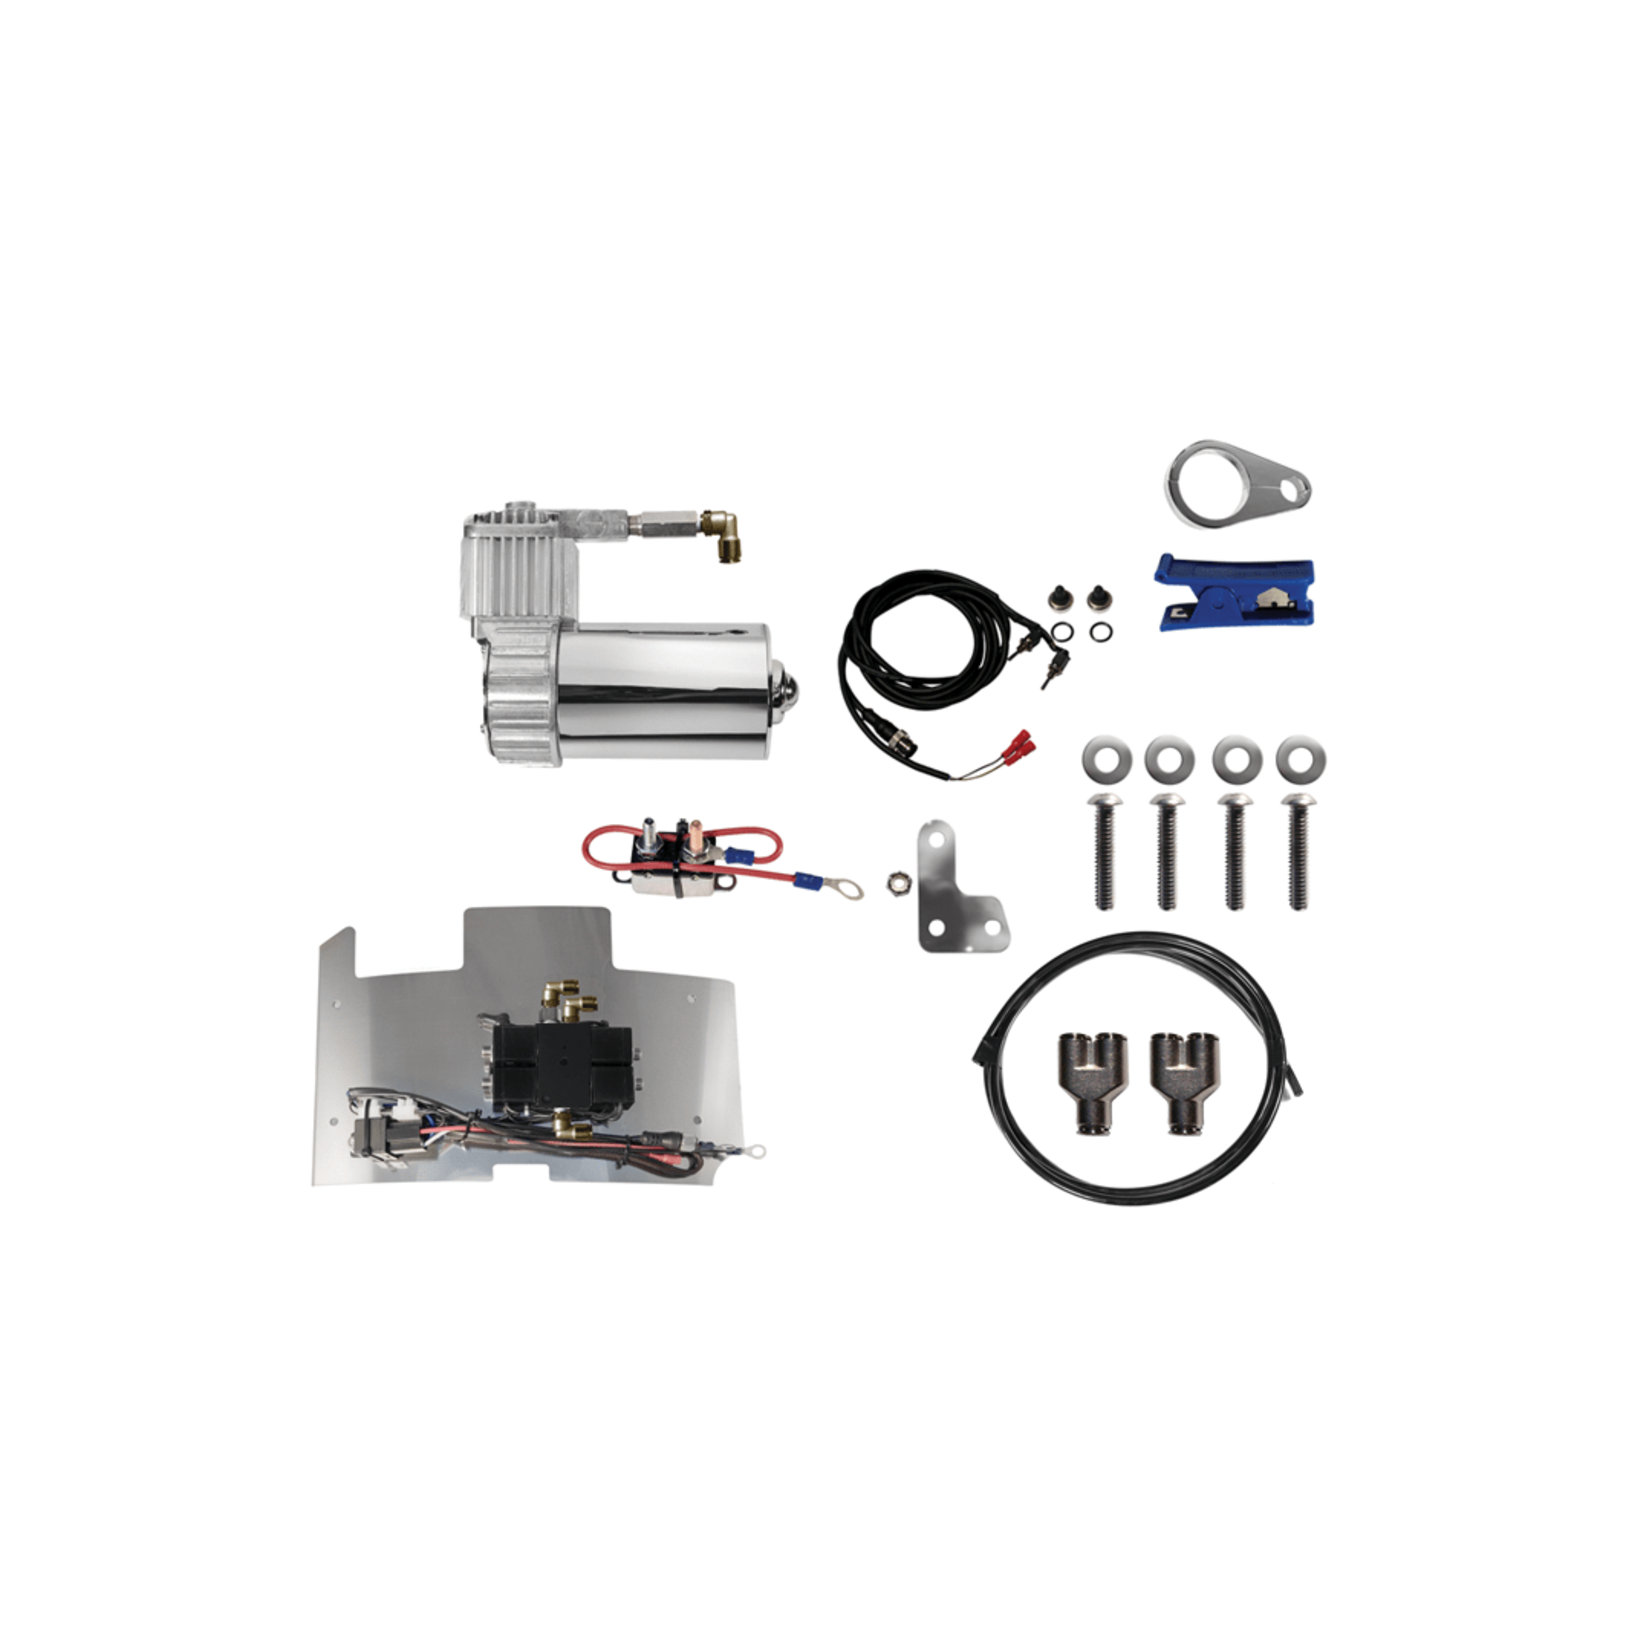 BLEED FEED TECHNOLOGY PLATINUM BLEED FEED AIR RIDE KIT FOR Harley EVO/SOFTAIL